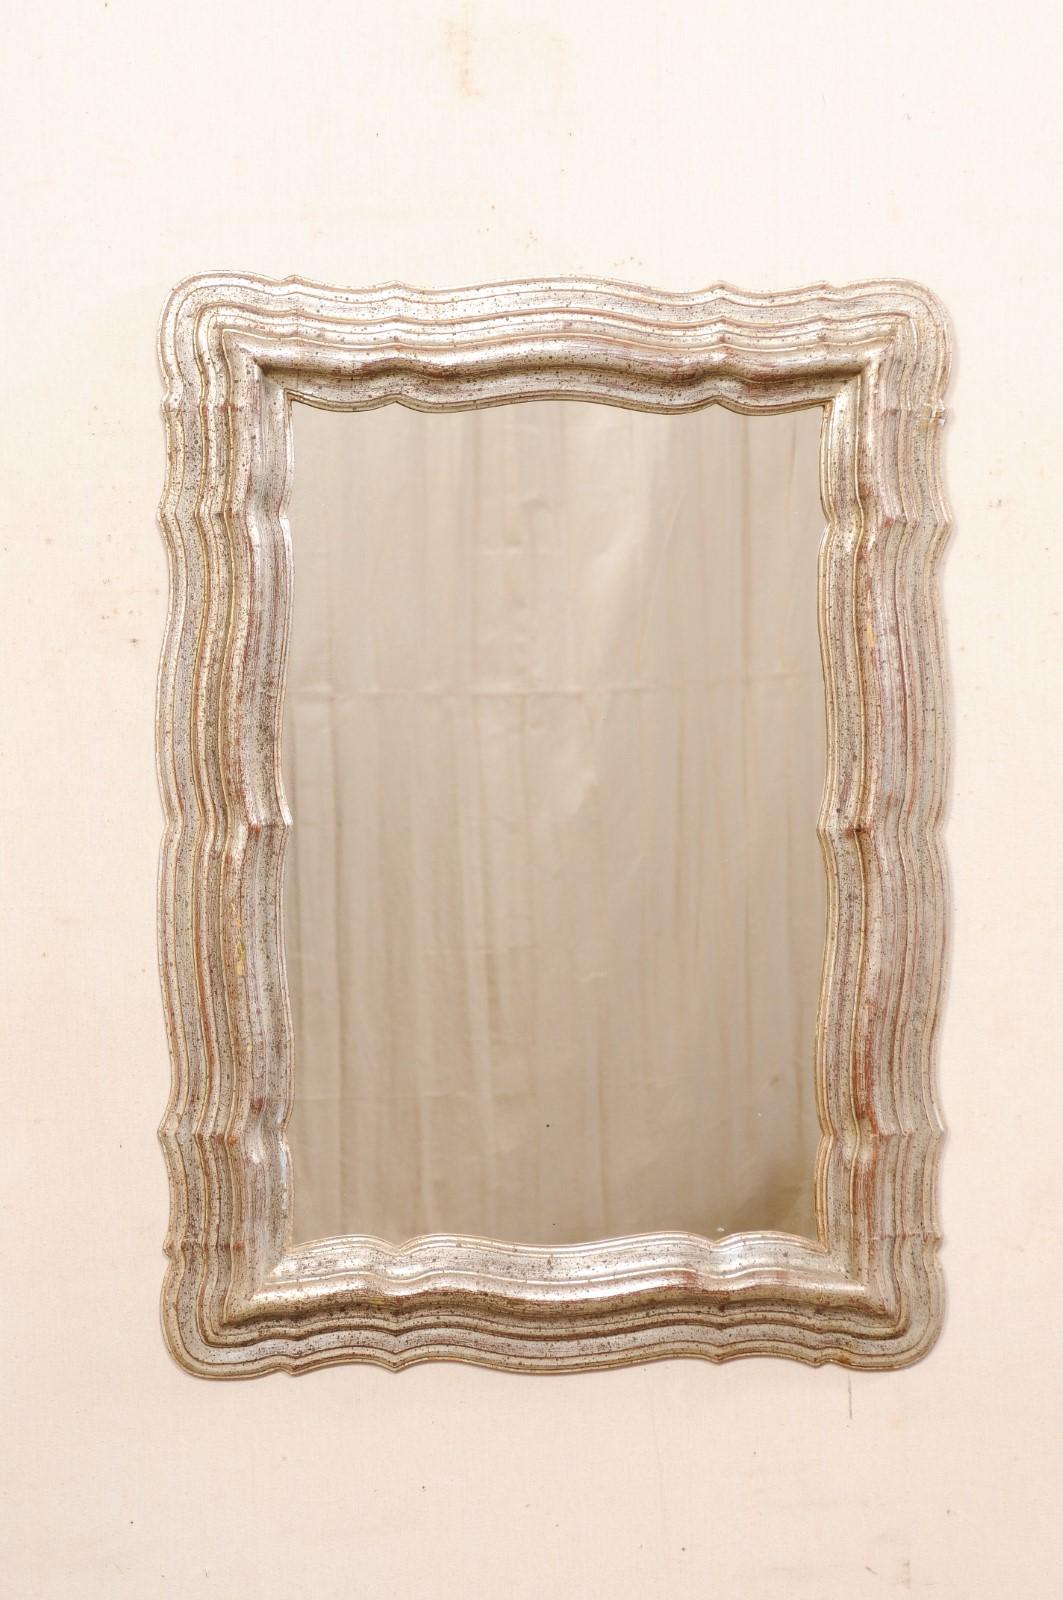 A French antiqued silver carved-wood mirror from the mid to later part of the 20th century. This vintage mirror from France has an overall rectangular shape with frame in a scalloped and stacked trim which gives this piece a beautifully rippling